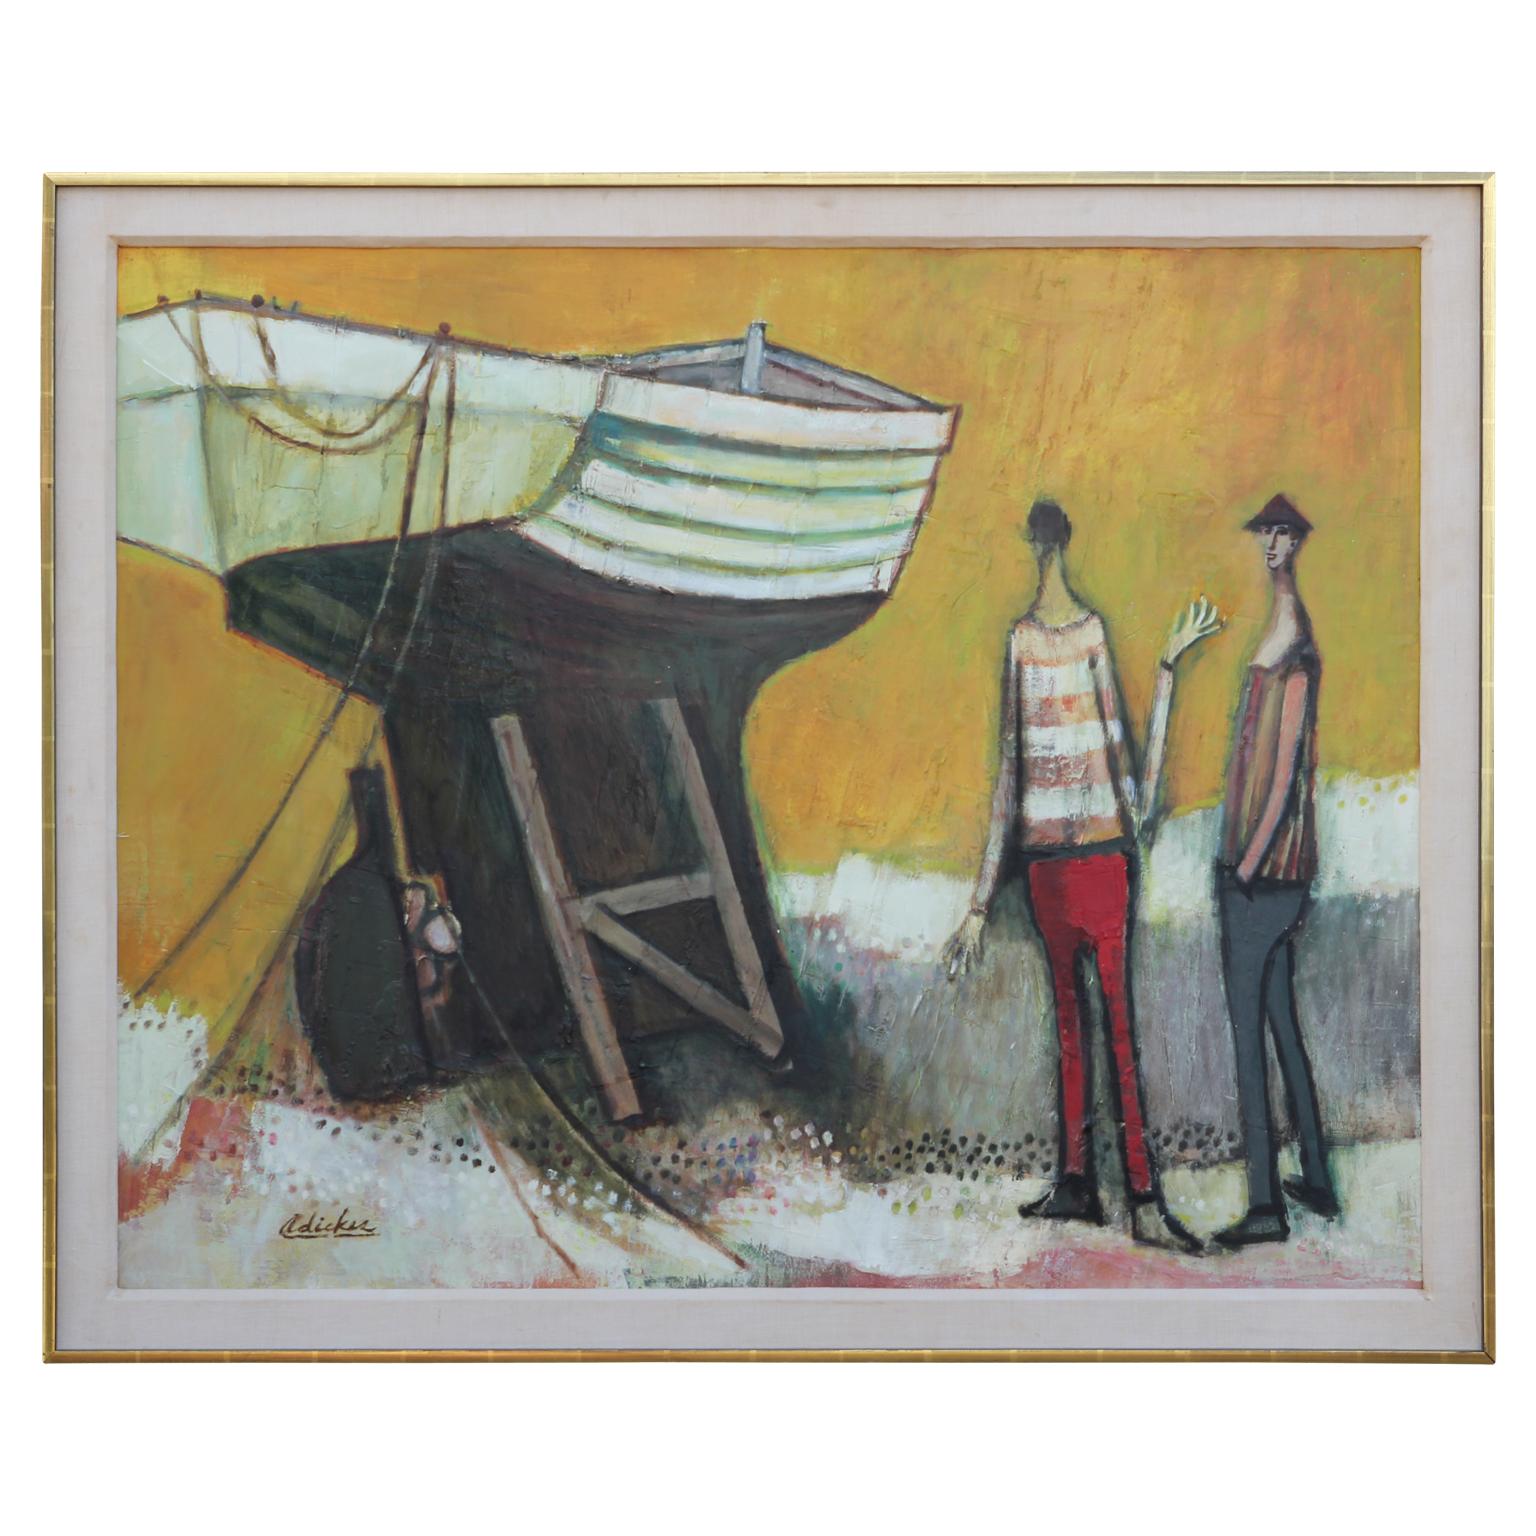 Early post-impressionist painting by Houston, Texas artist David Adickes. The figures are painted in David Adickes's famous style while he used this layers of paint to create a textured surface. The piece is signed by the artist in the lower-left